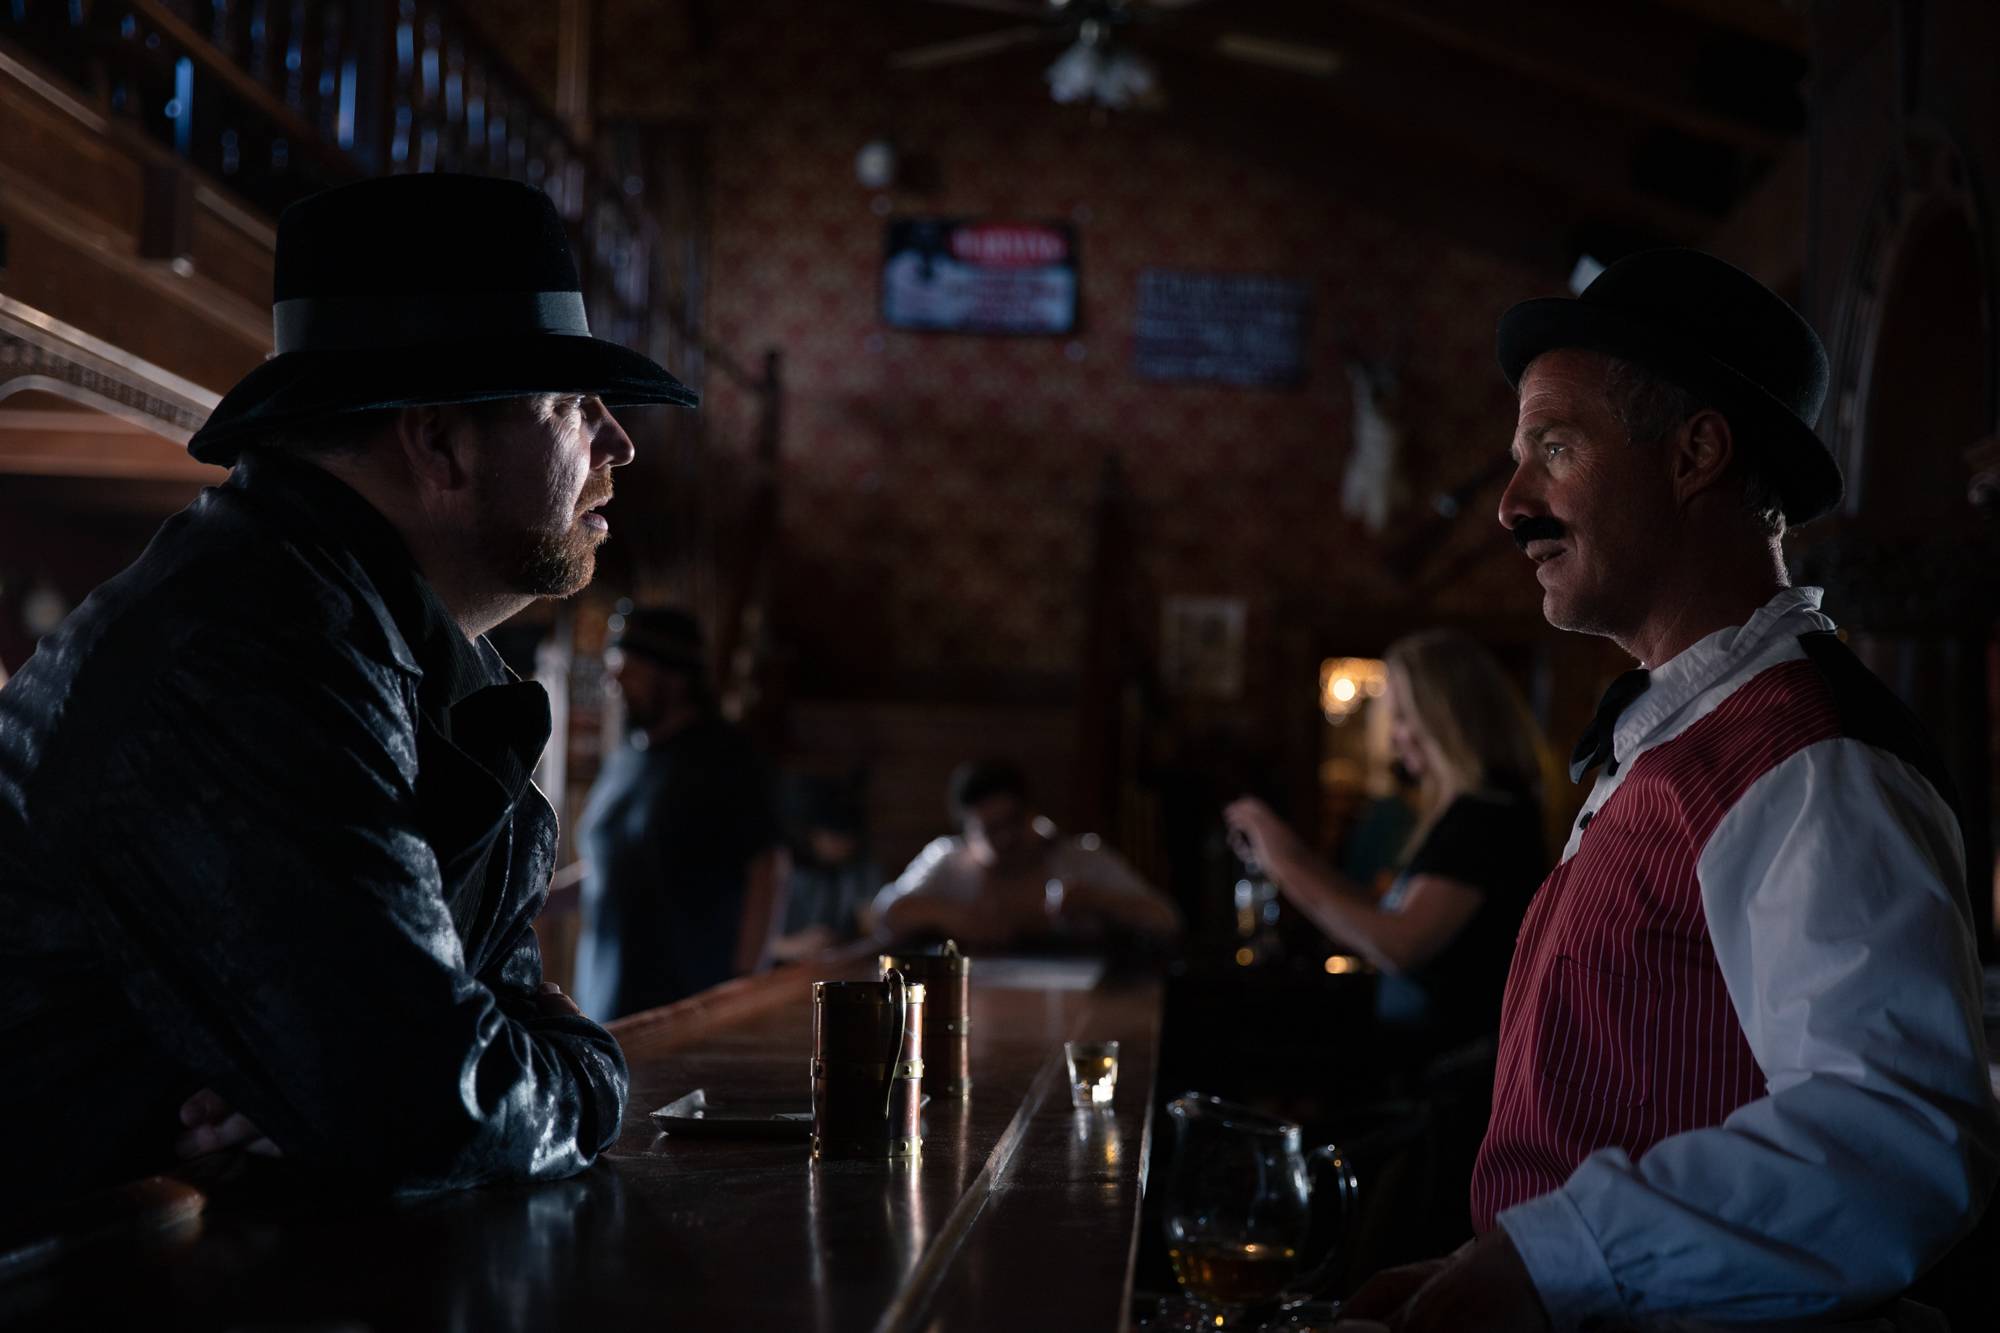 Sean FitzSimons, left, speaks to Jeffrey MacBurnie during filming an 1800s western documentary on Friday, June 24, 2022, at Mount Wilson Ranch in Mt. Wilson, Nevada.